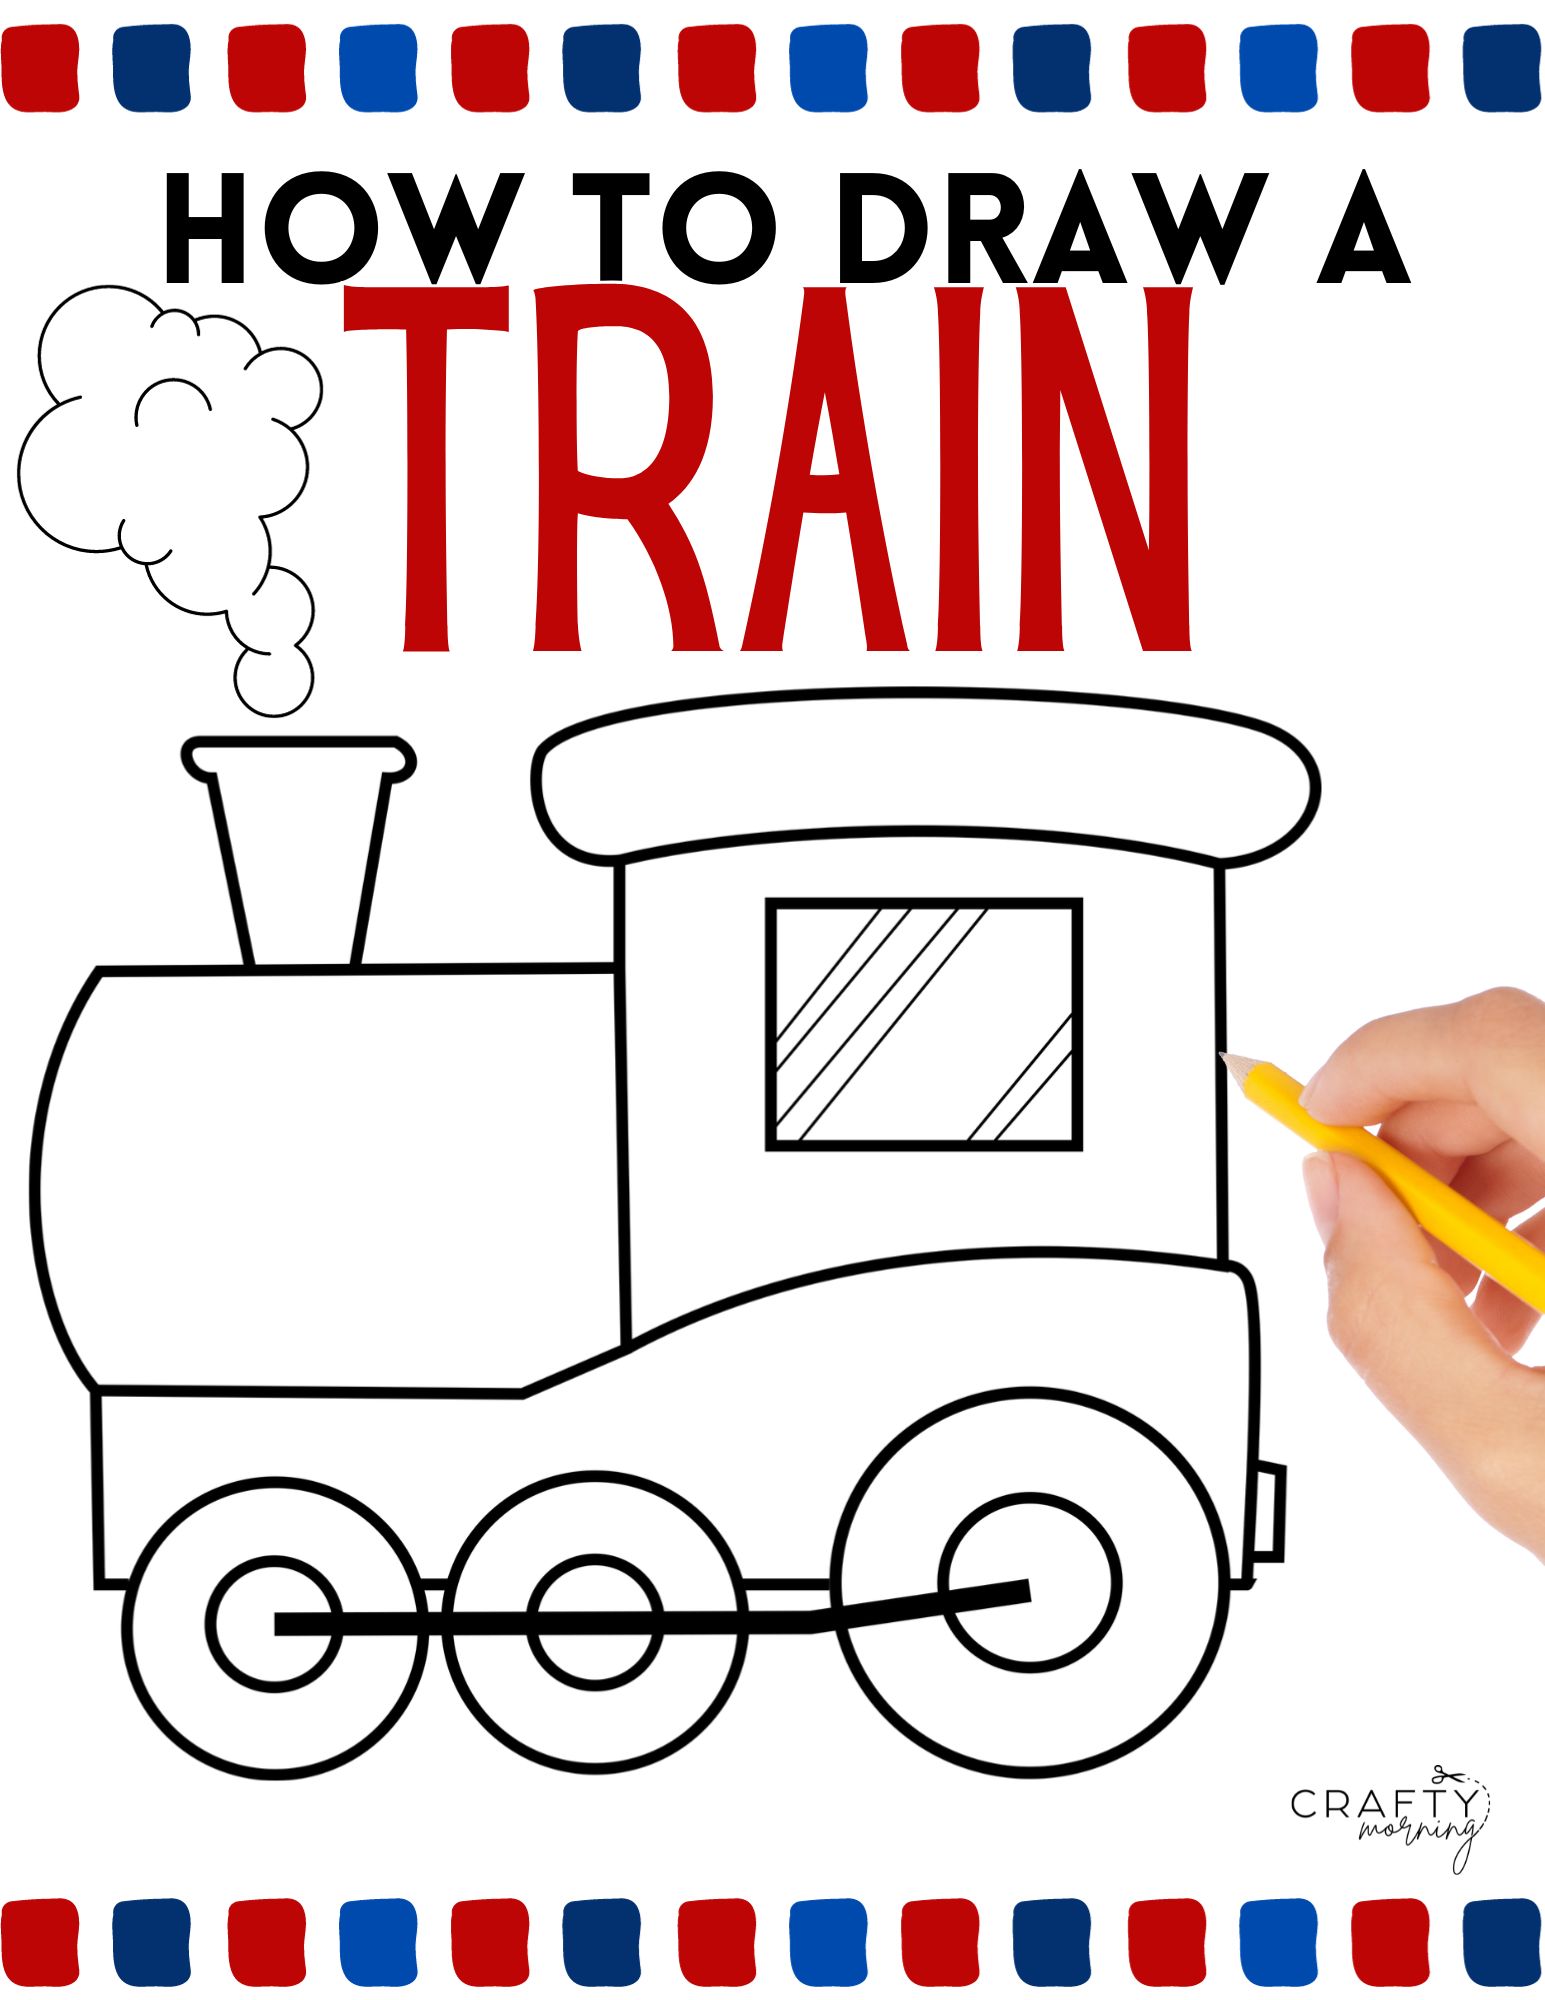 How to Draw a Train for Kids (Trains) Step by Step | DrawingTutorials101.com